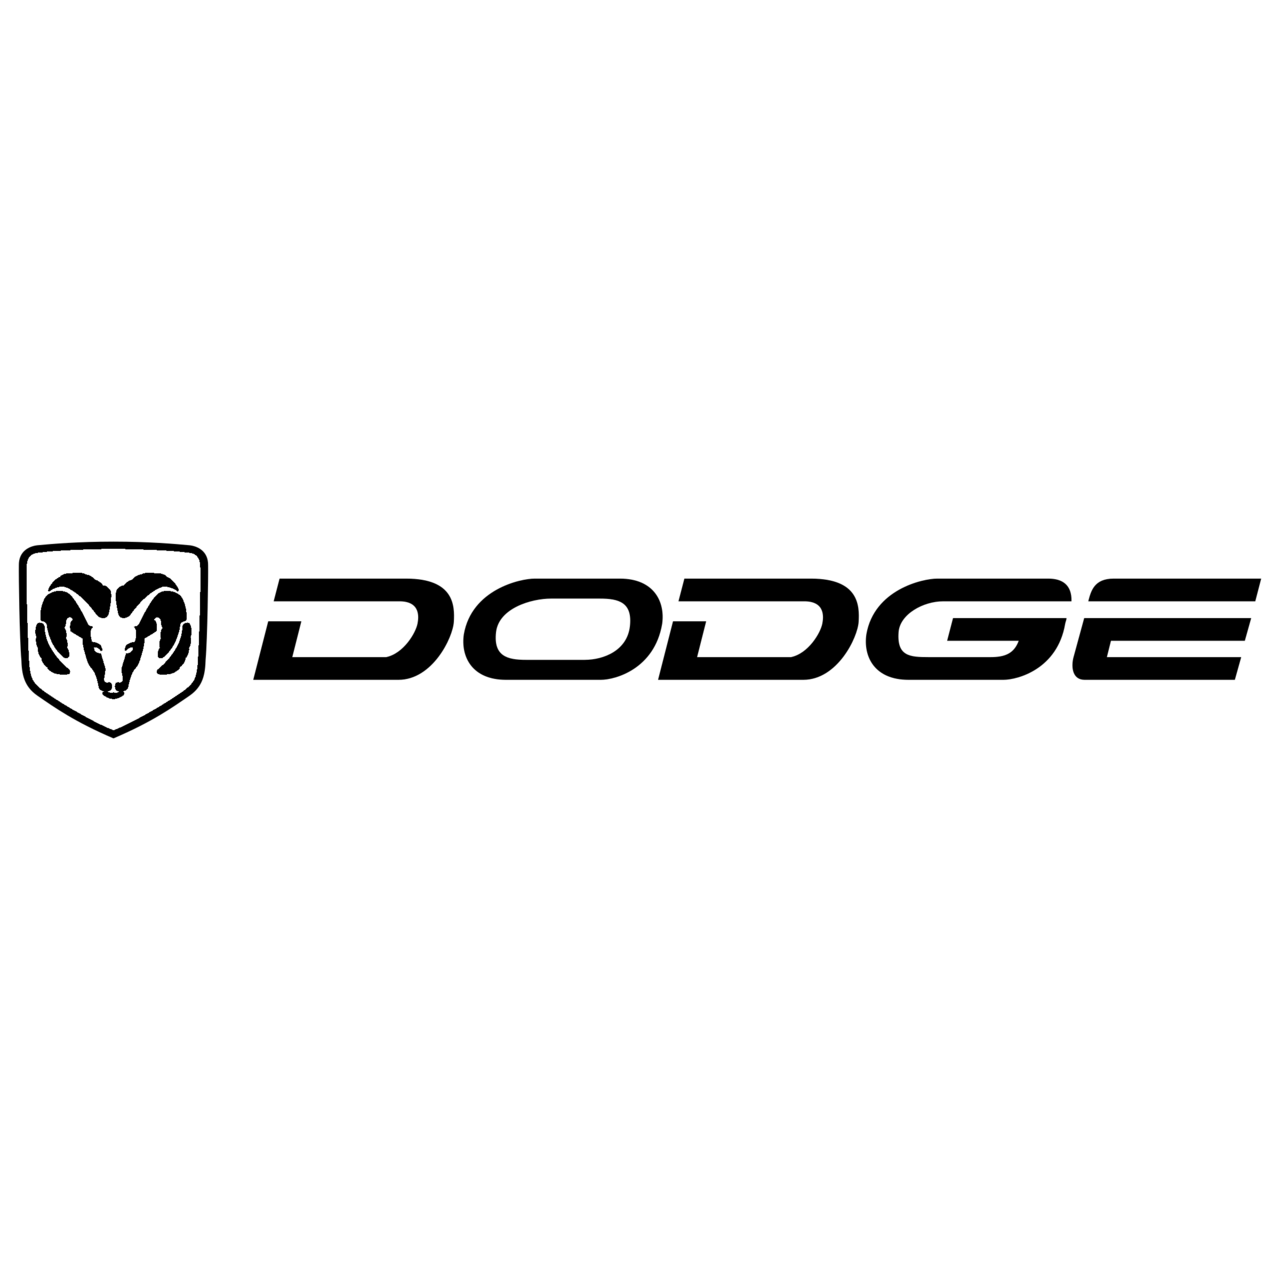 dodge-logo-black-and-white.png